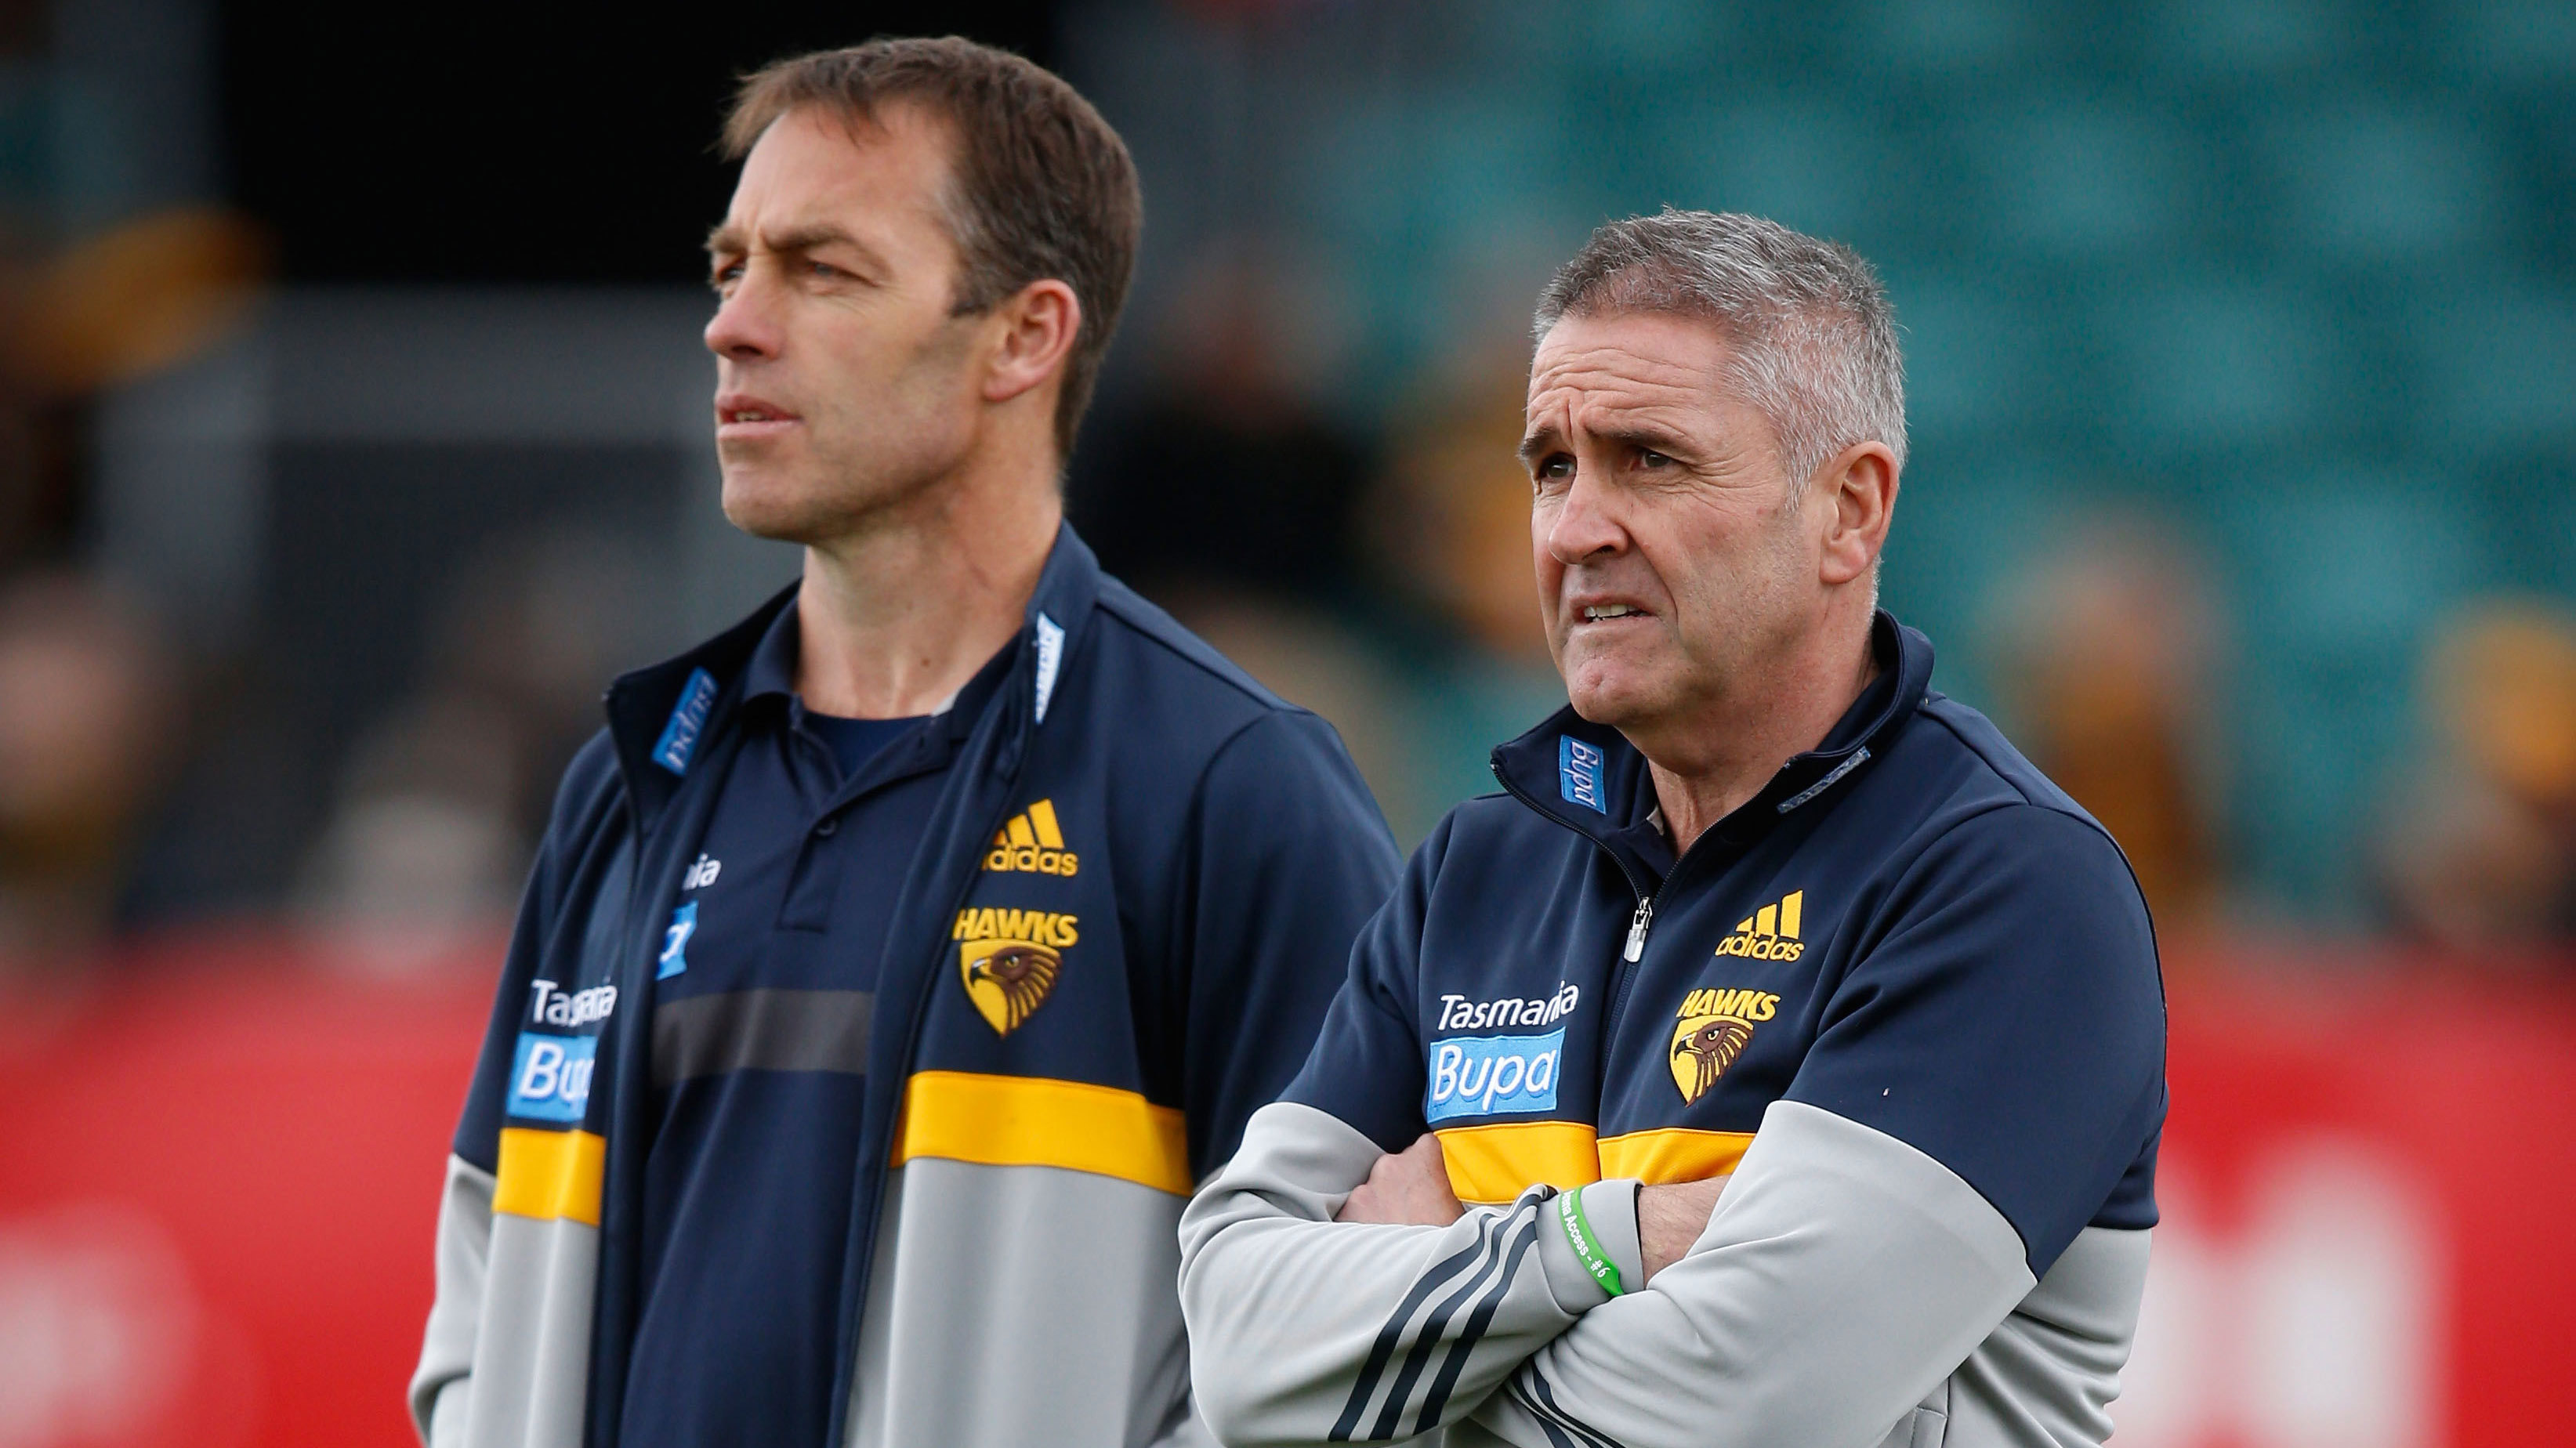 Then Hawthorn senior coach Alastair Clarkson with then General Manager Football Operations Chris Fagan in 2015.